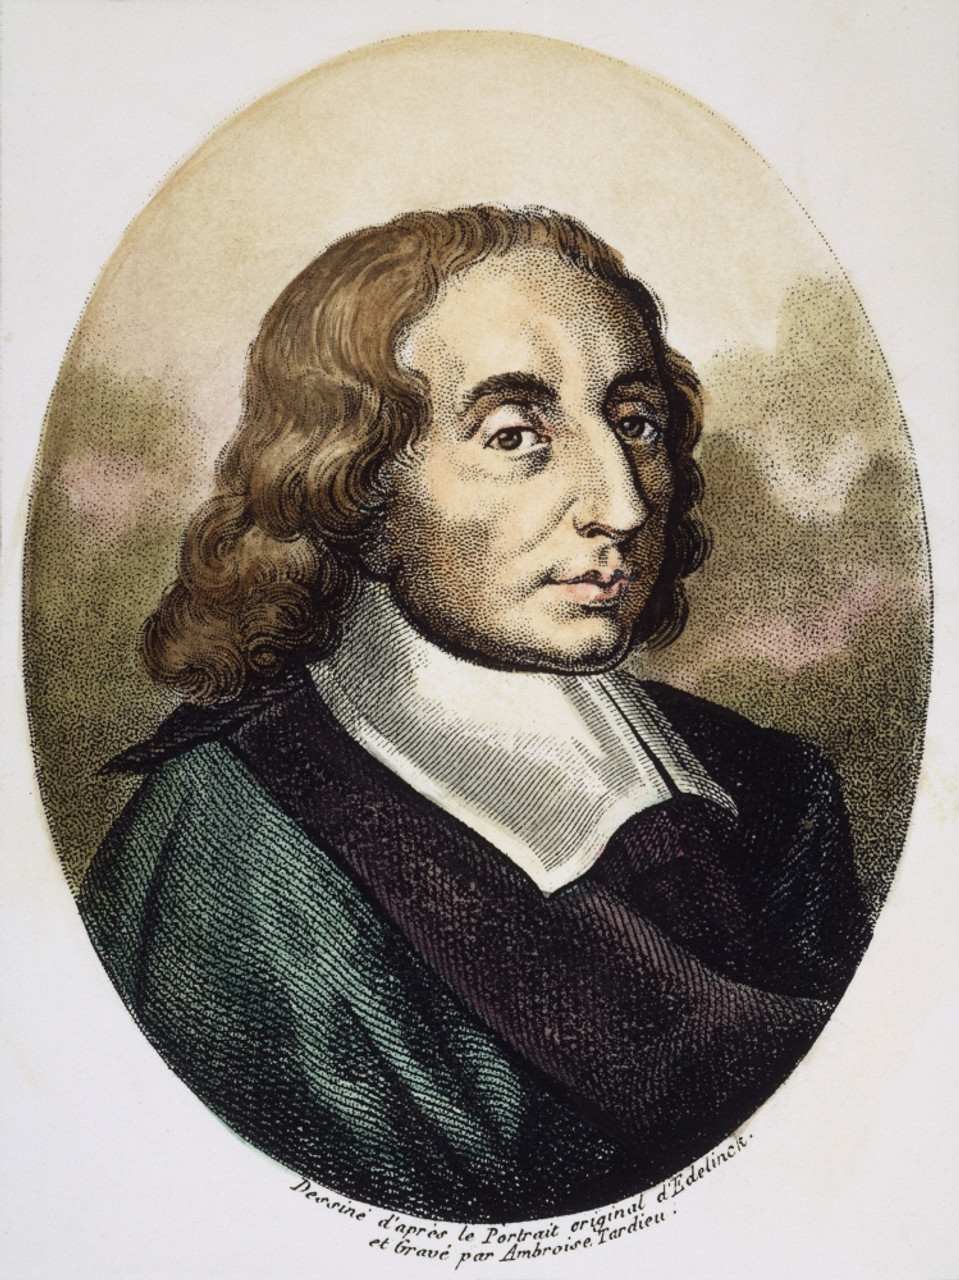 Blaise Pascal (1623-1662). # Poster Philosopher. Item VARGRC0008017 Granger Print - (1788-1841). Stipple By Posterazzi - /Nfrench Engraving Scientist Collection by And Ambroise Tardieu